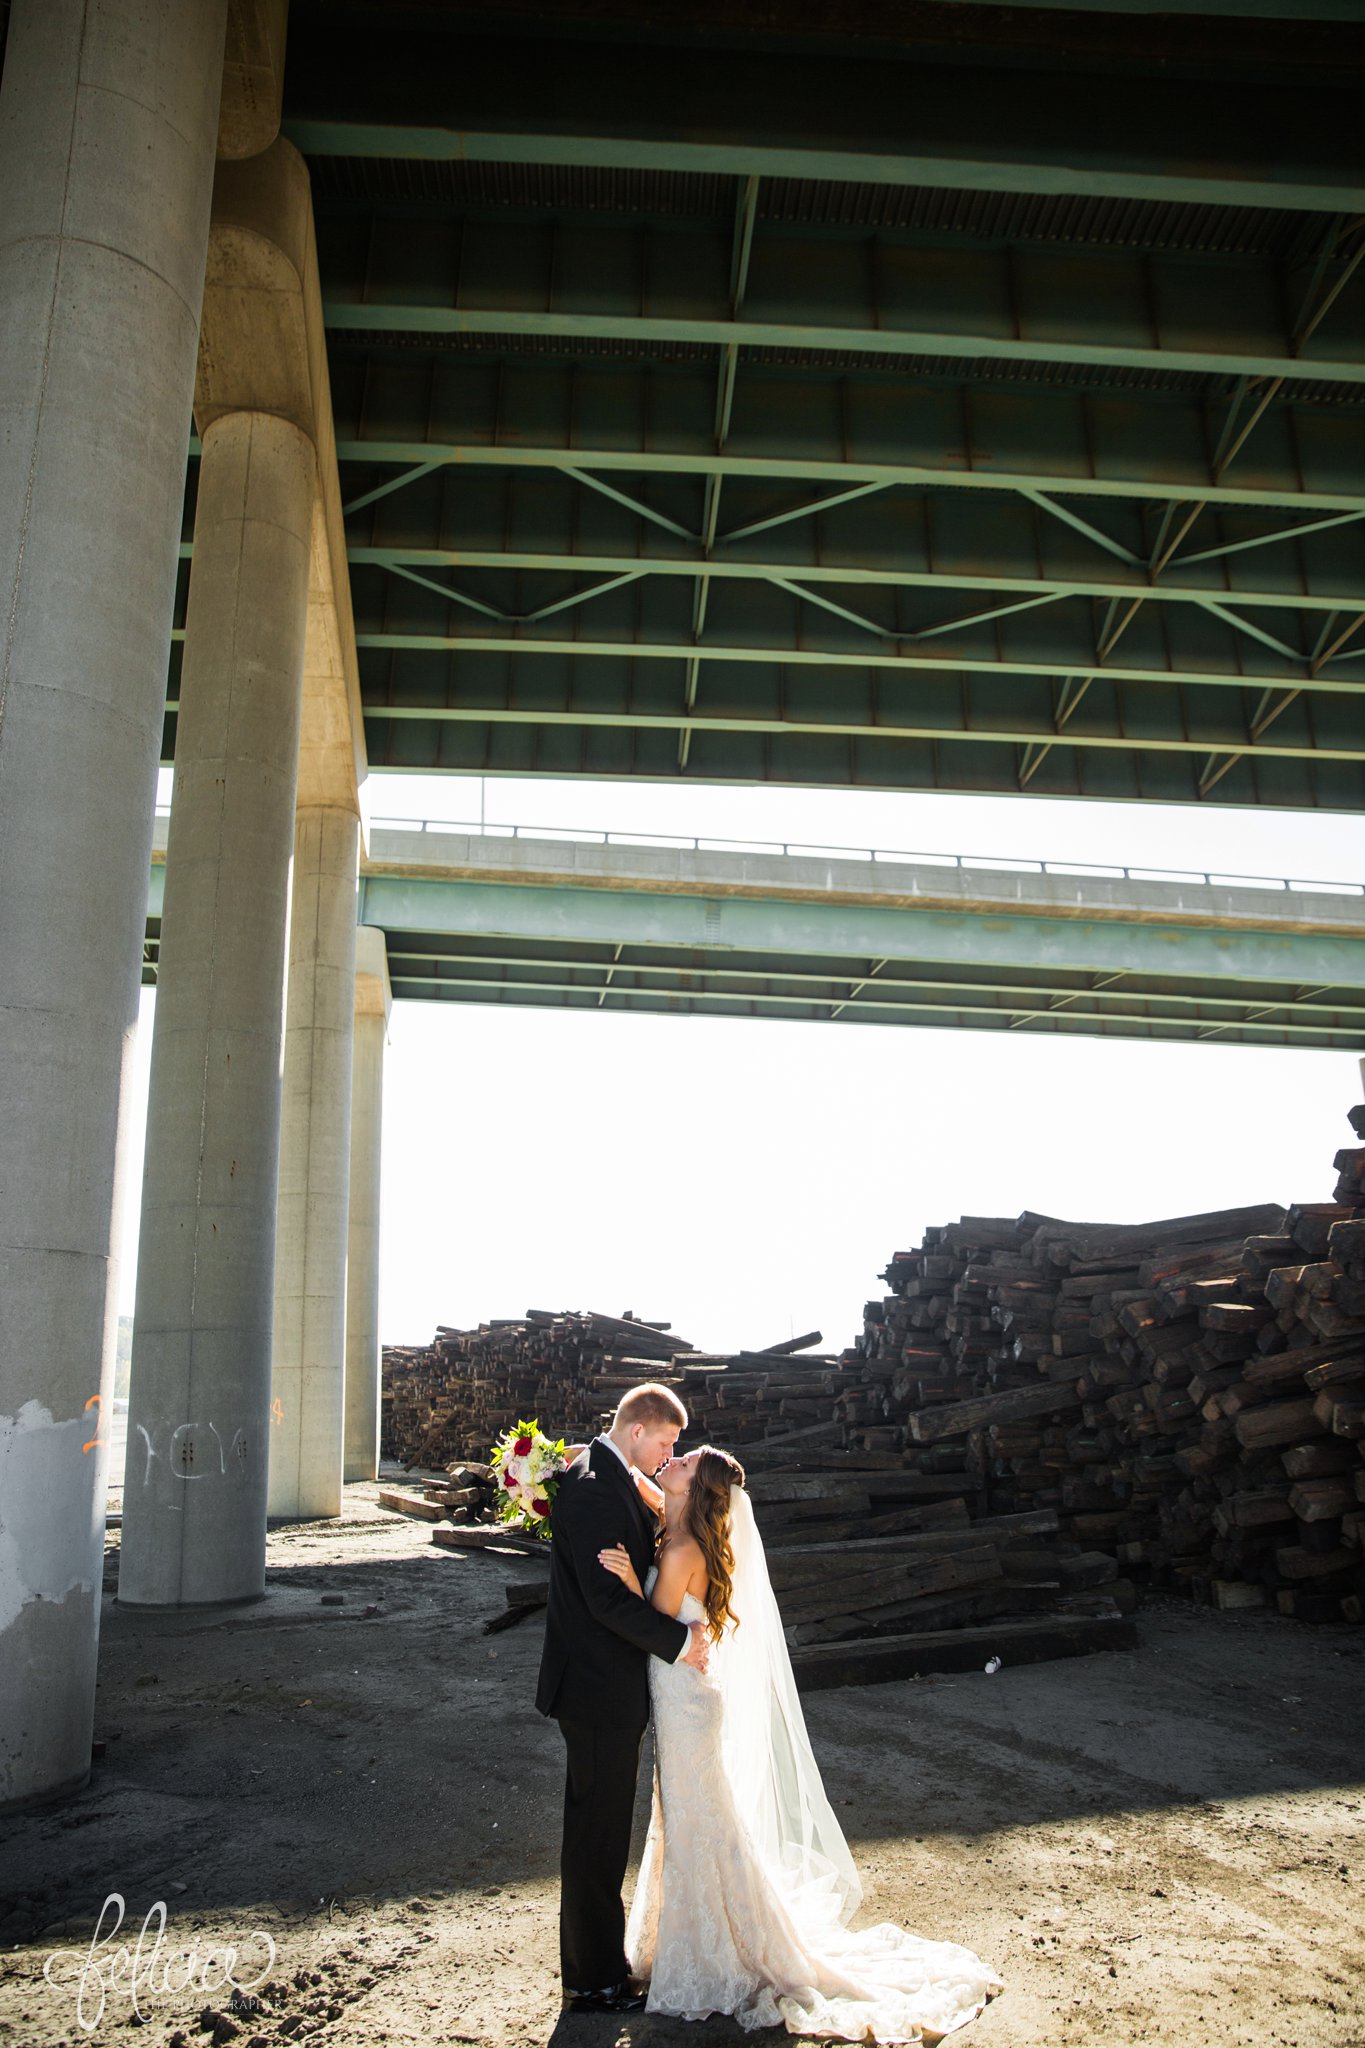 wedding | wedding photos | industrial | Rumely Event Space | wedding photography | images by feliciathephotographer.com | West Bottoms | industrial background | bride and groom portraits | kissing | Maggie Sottero | overpass 